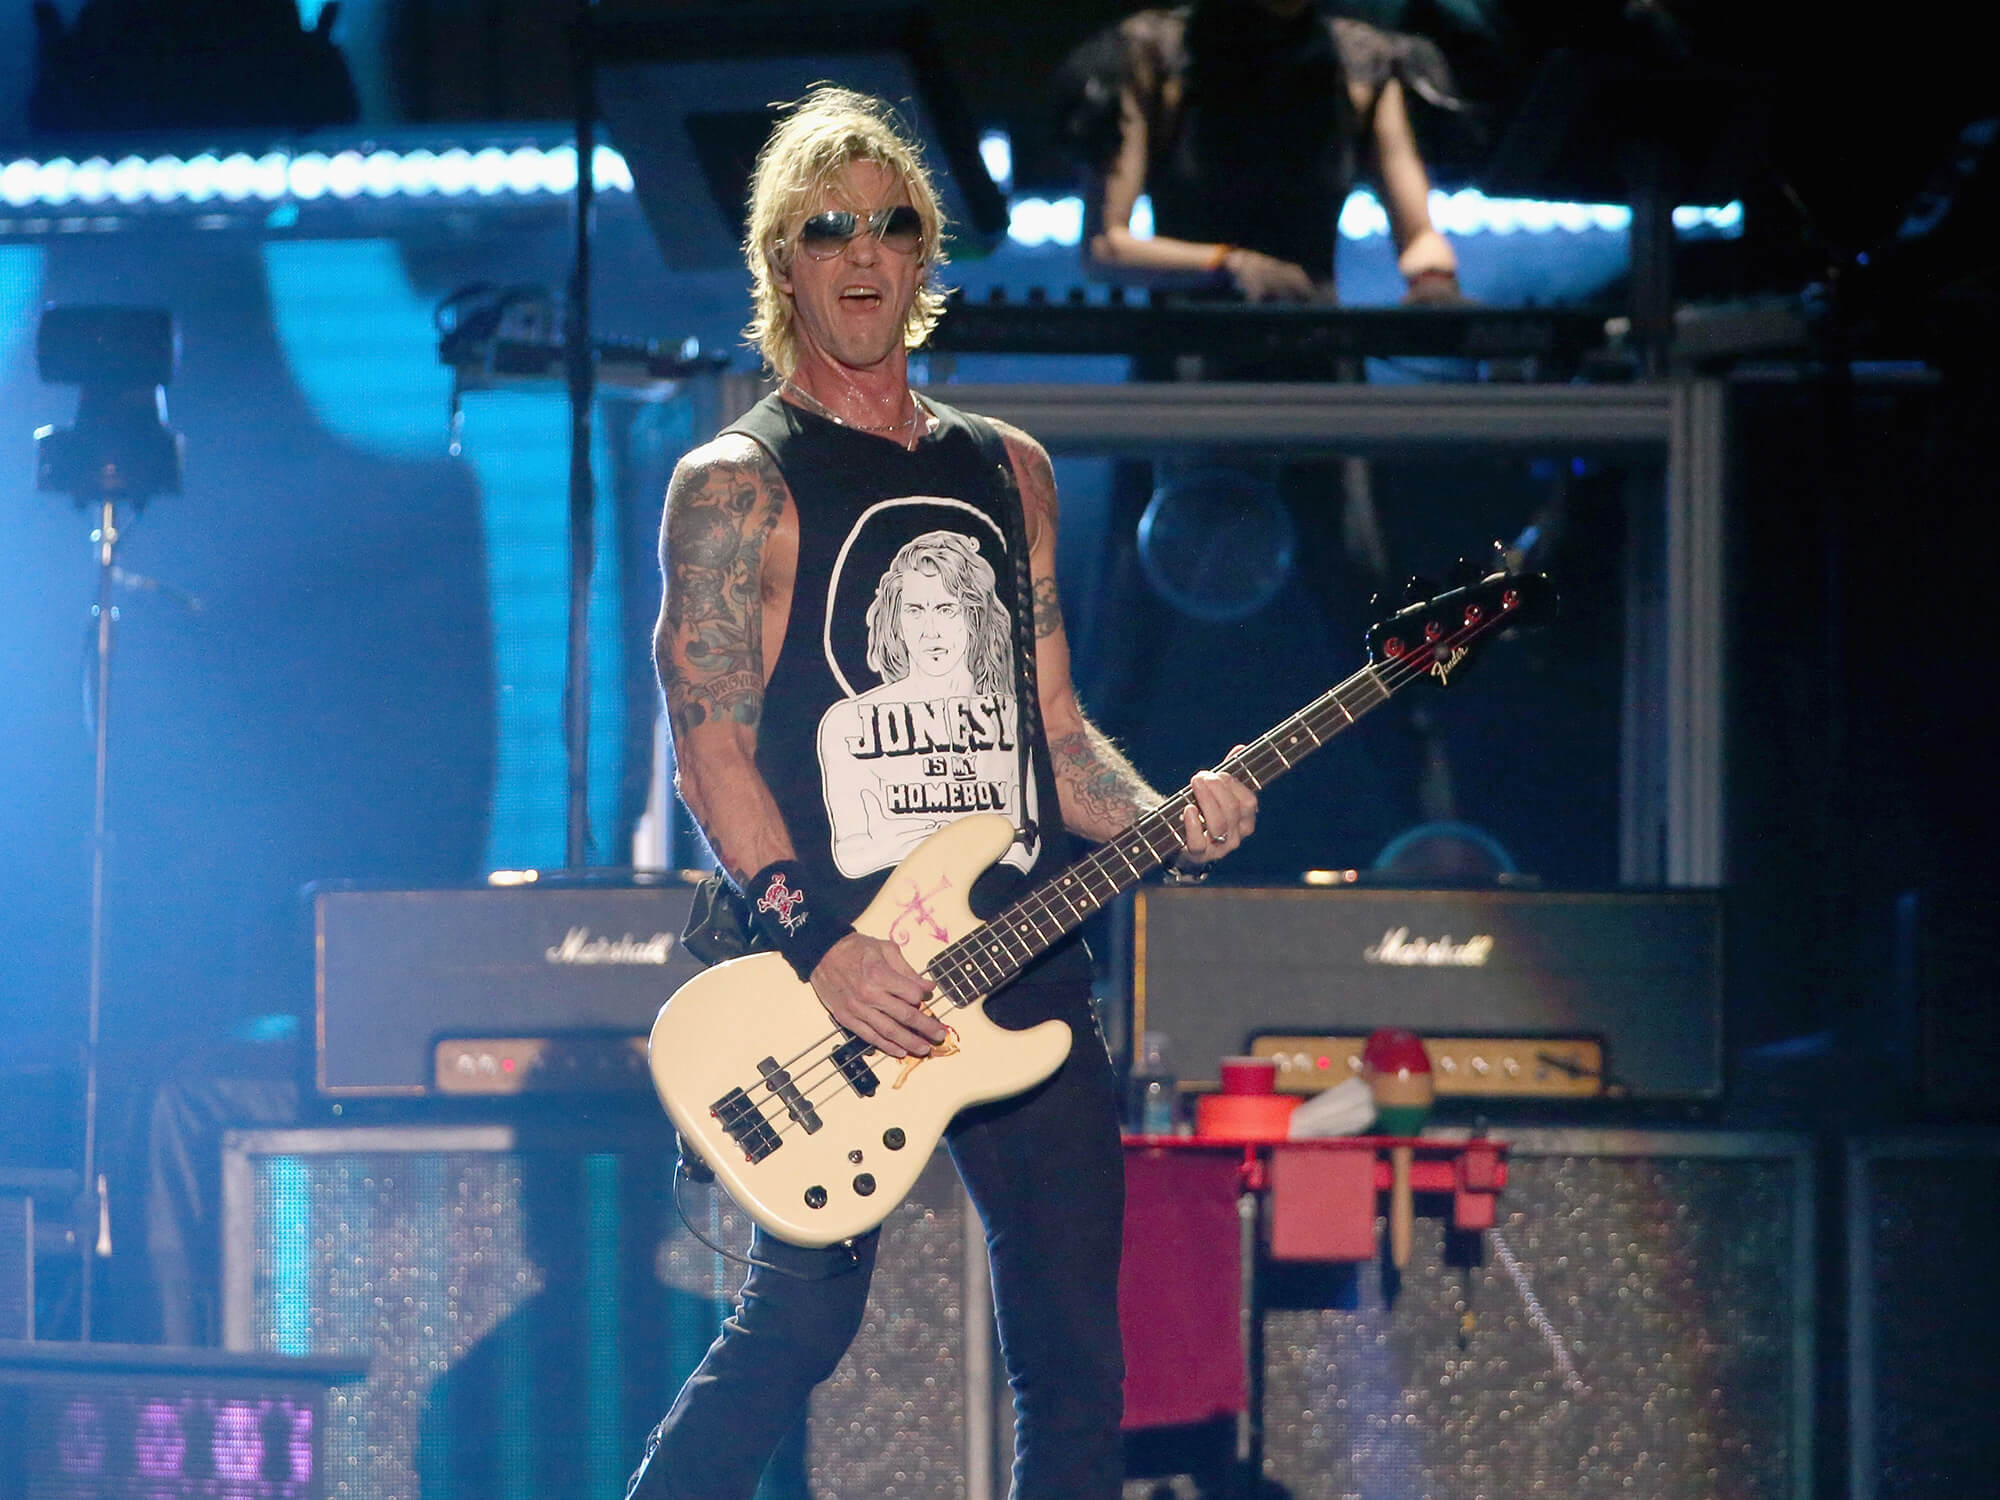 Duff McKagan playing bass on stage.